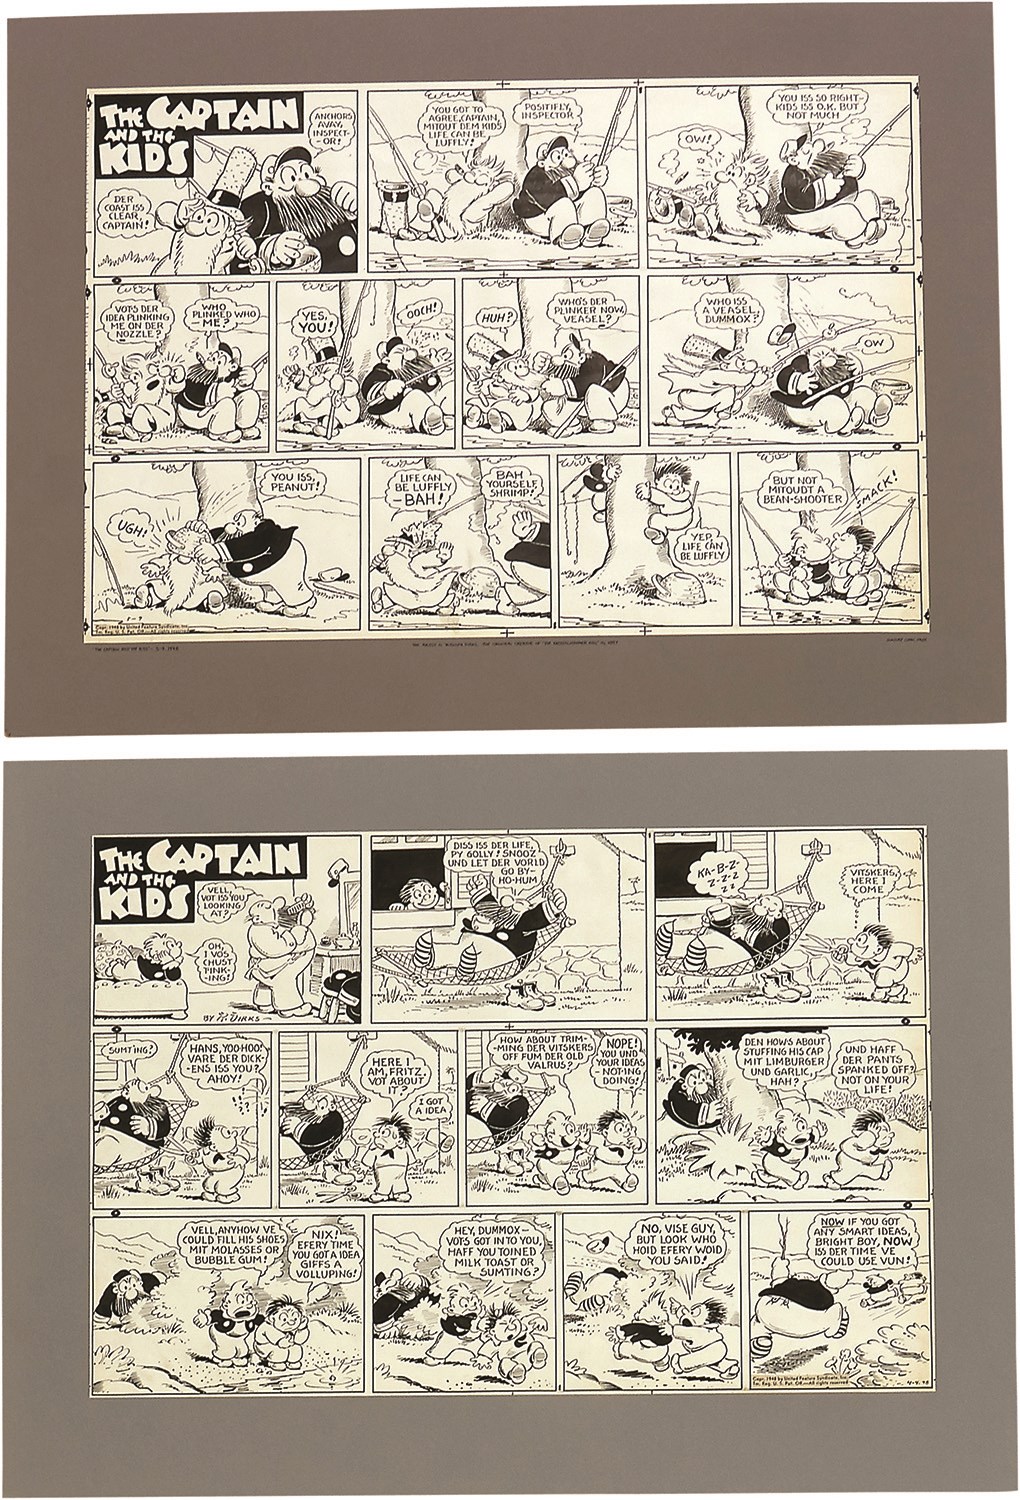 Comics - Two 1948 Captain and the Kids Sunday Page Original Art